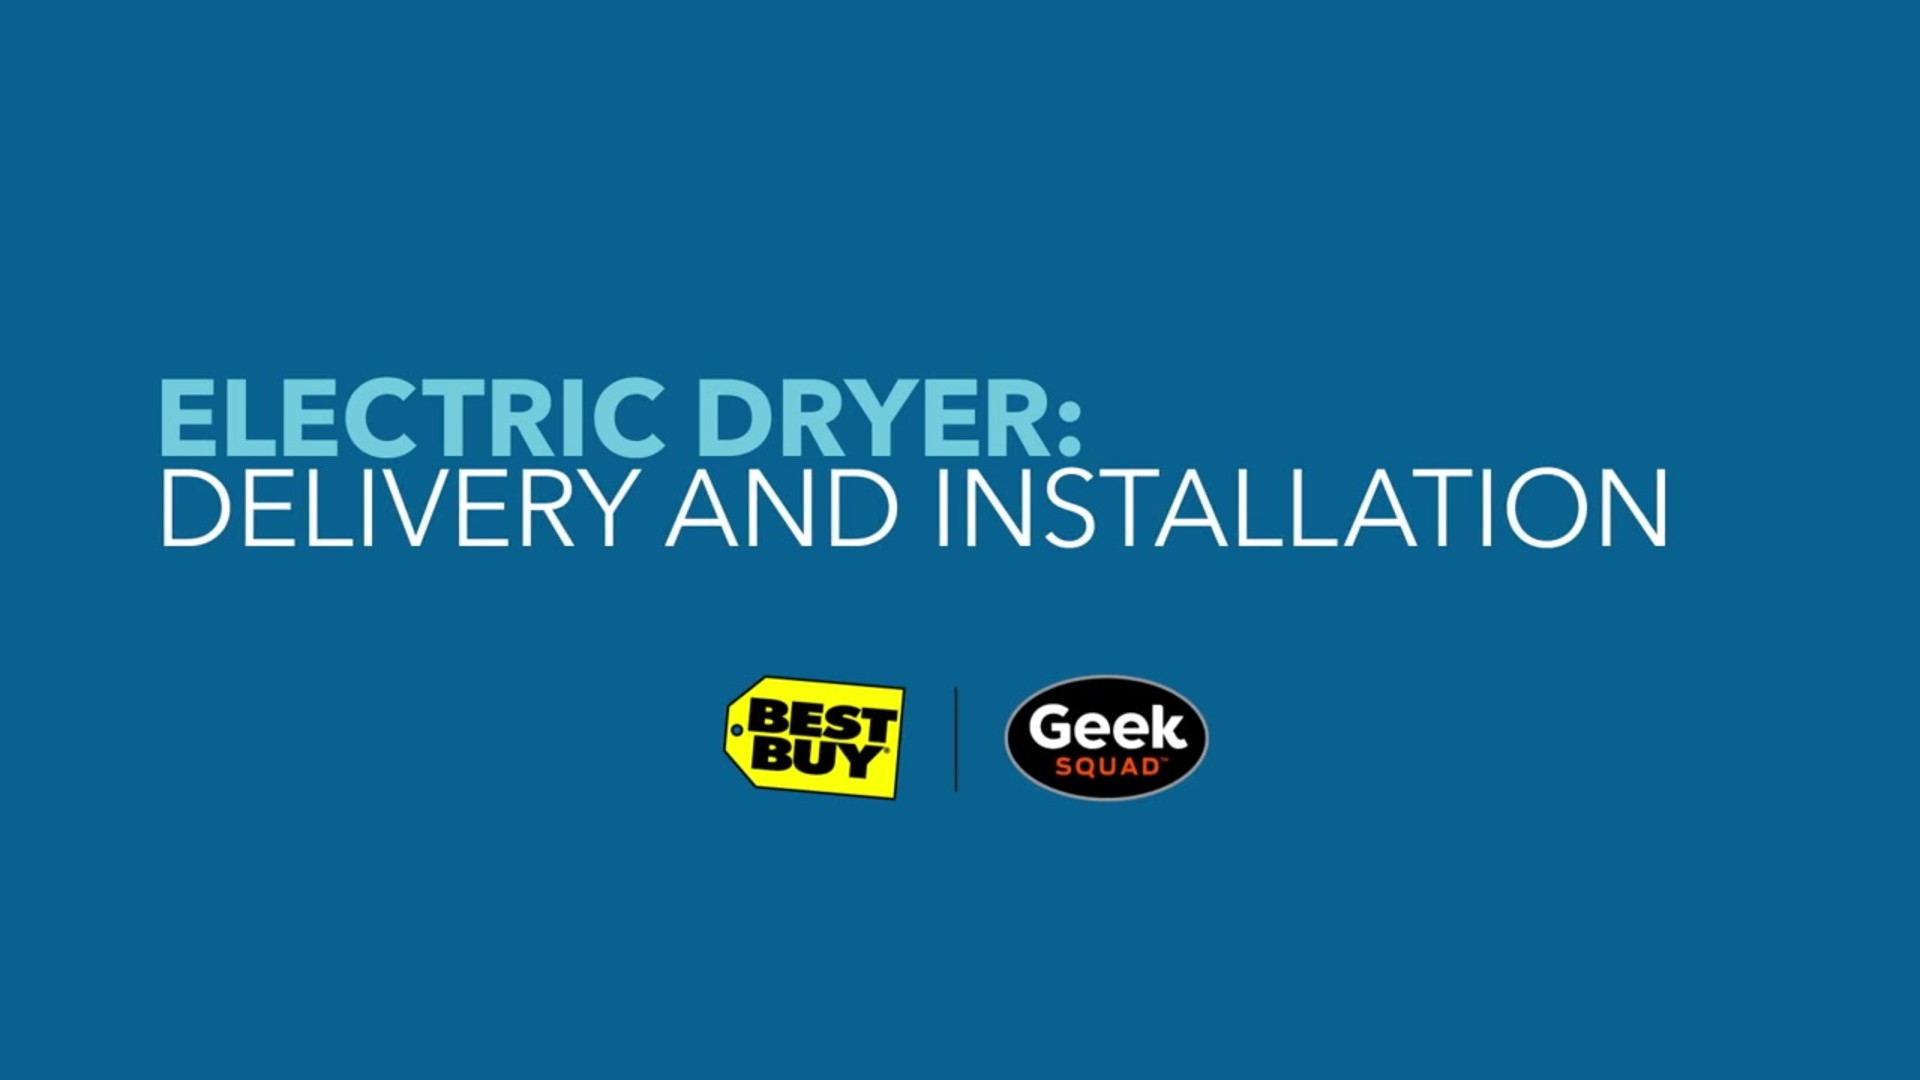 Small Clothes Dryer - Best Buy